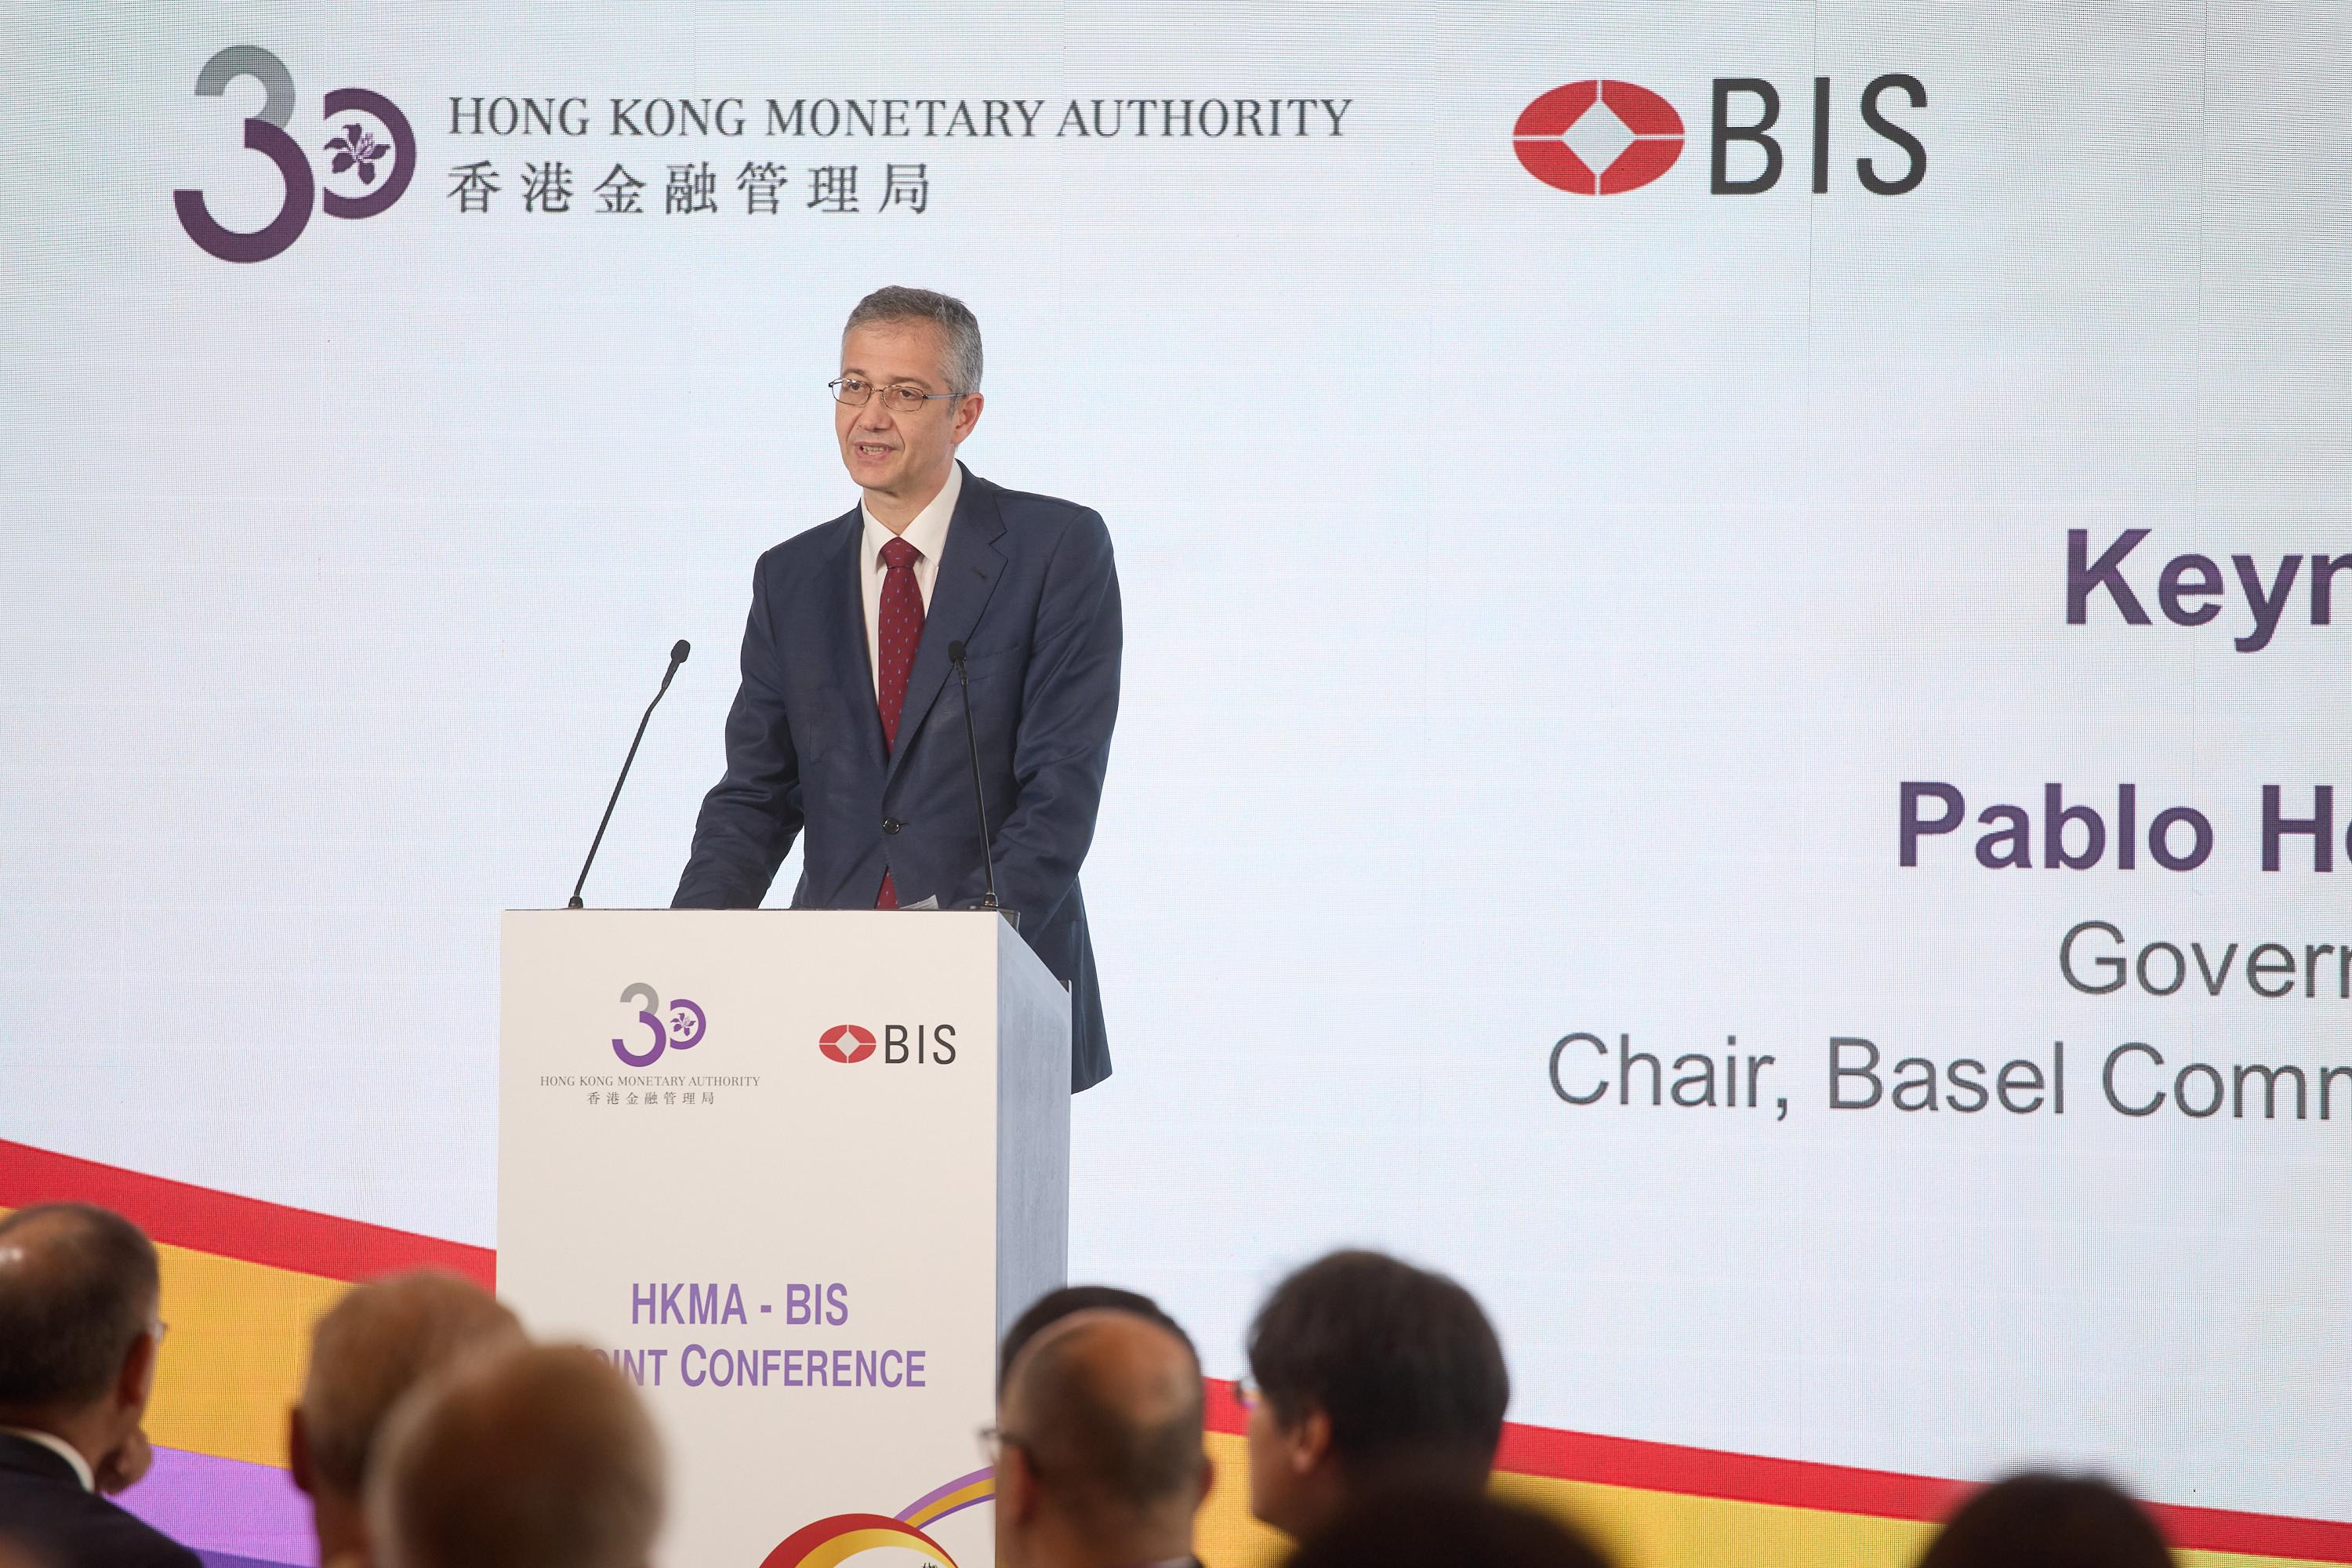 An international financial regulatory conference jointly co-organised by the Hong Kong Monetary Authority and the Bank for International Settlements was successfully concluded today (March 24) in Hong Kong. Photo shows the Governor of the Bank of Spain and Chair of the Basel Committee on Banking Supervision, Mr Pablo Hernández de Cos, delivers the keynote speech.